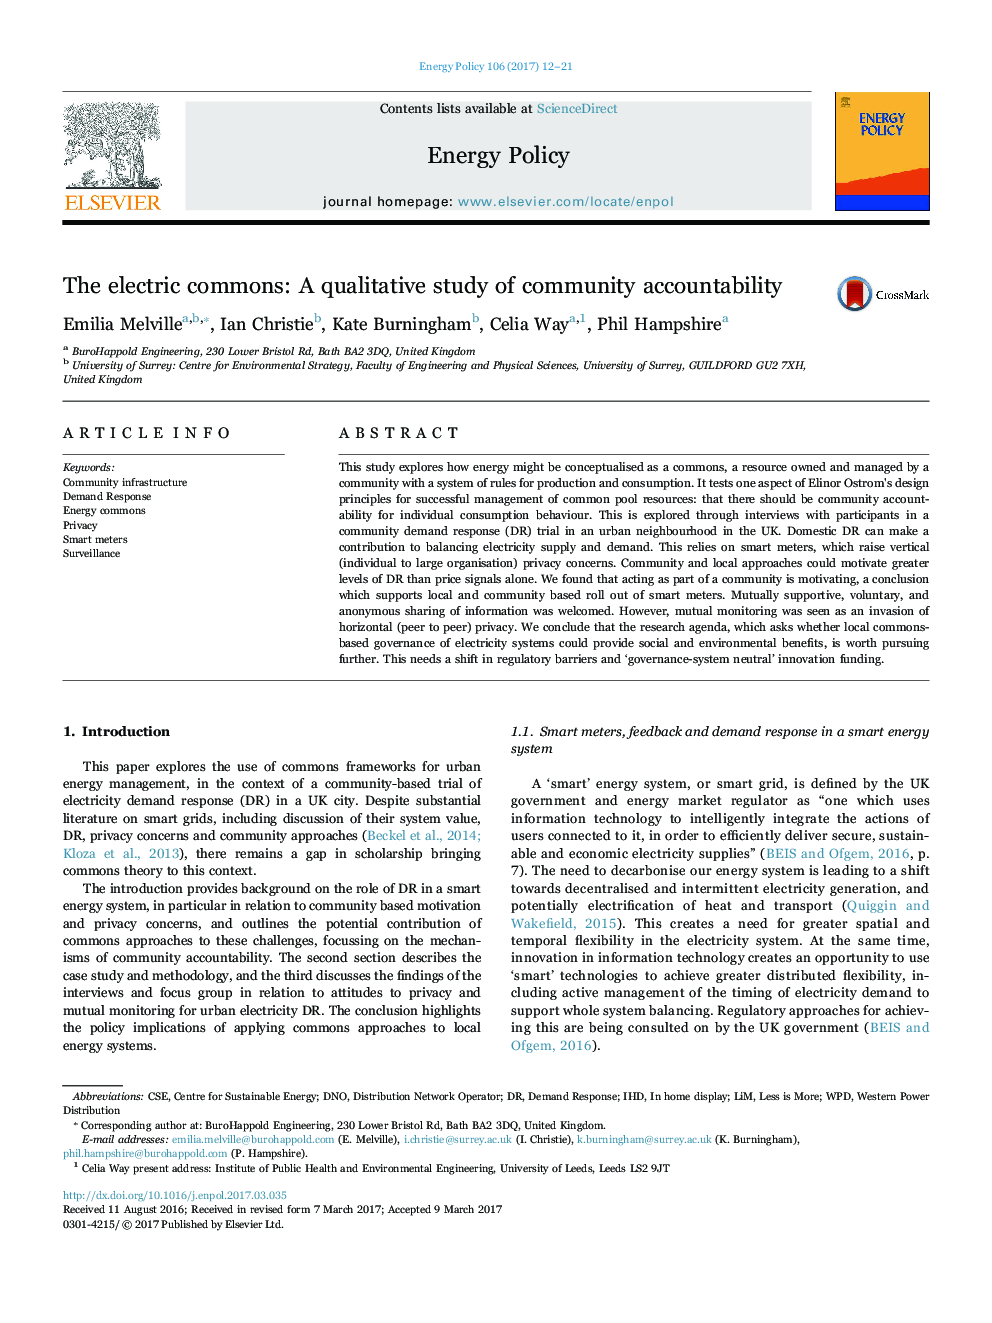 The electric commons: A qualitative study of community accountability